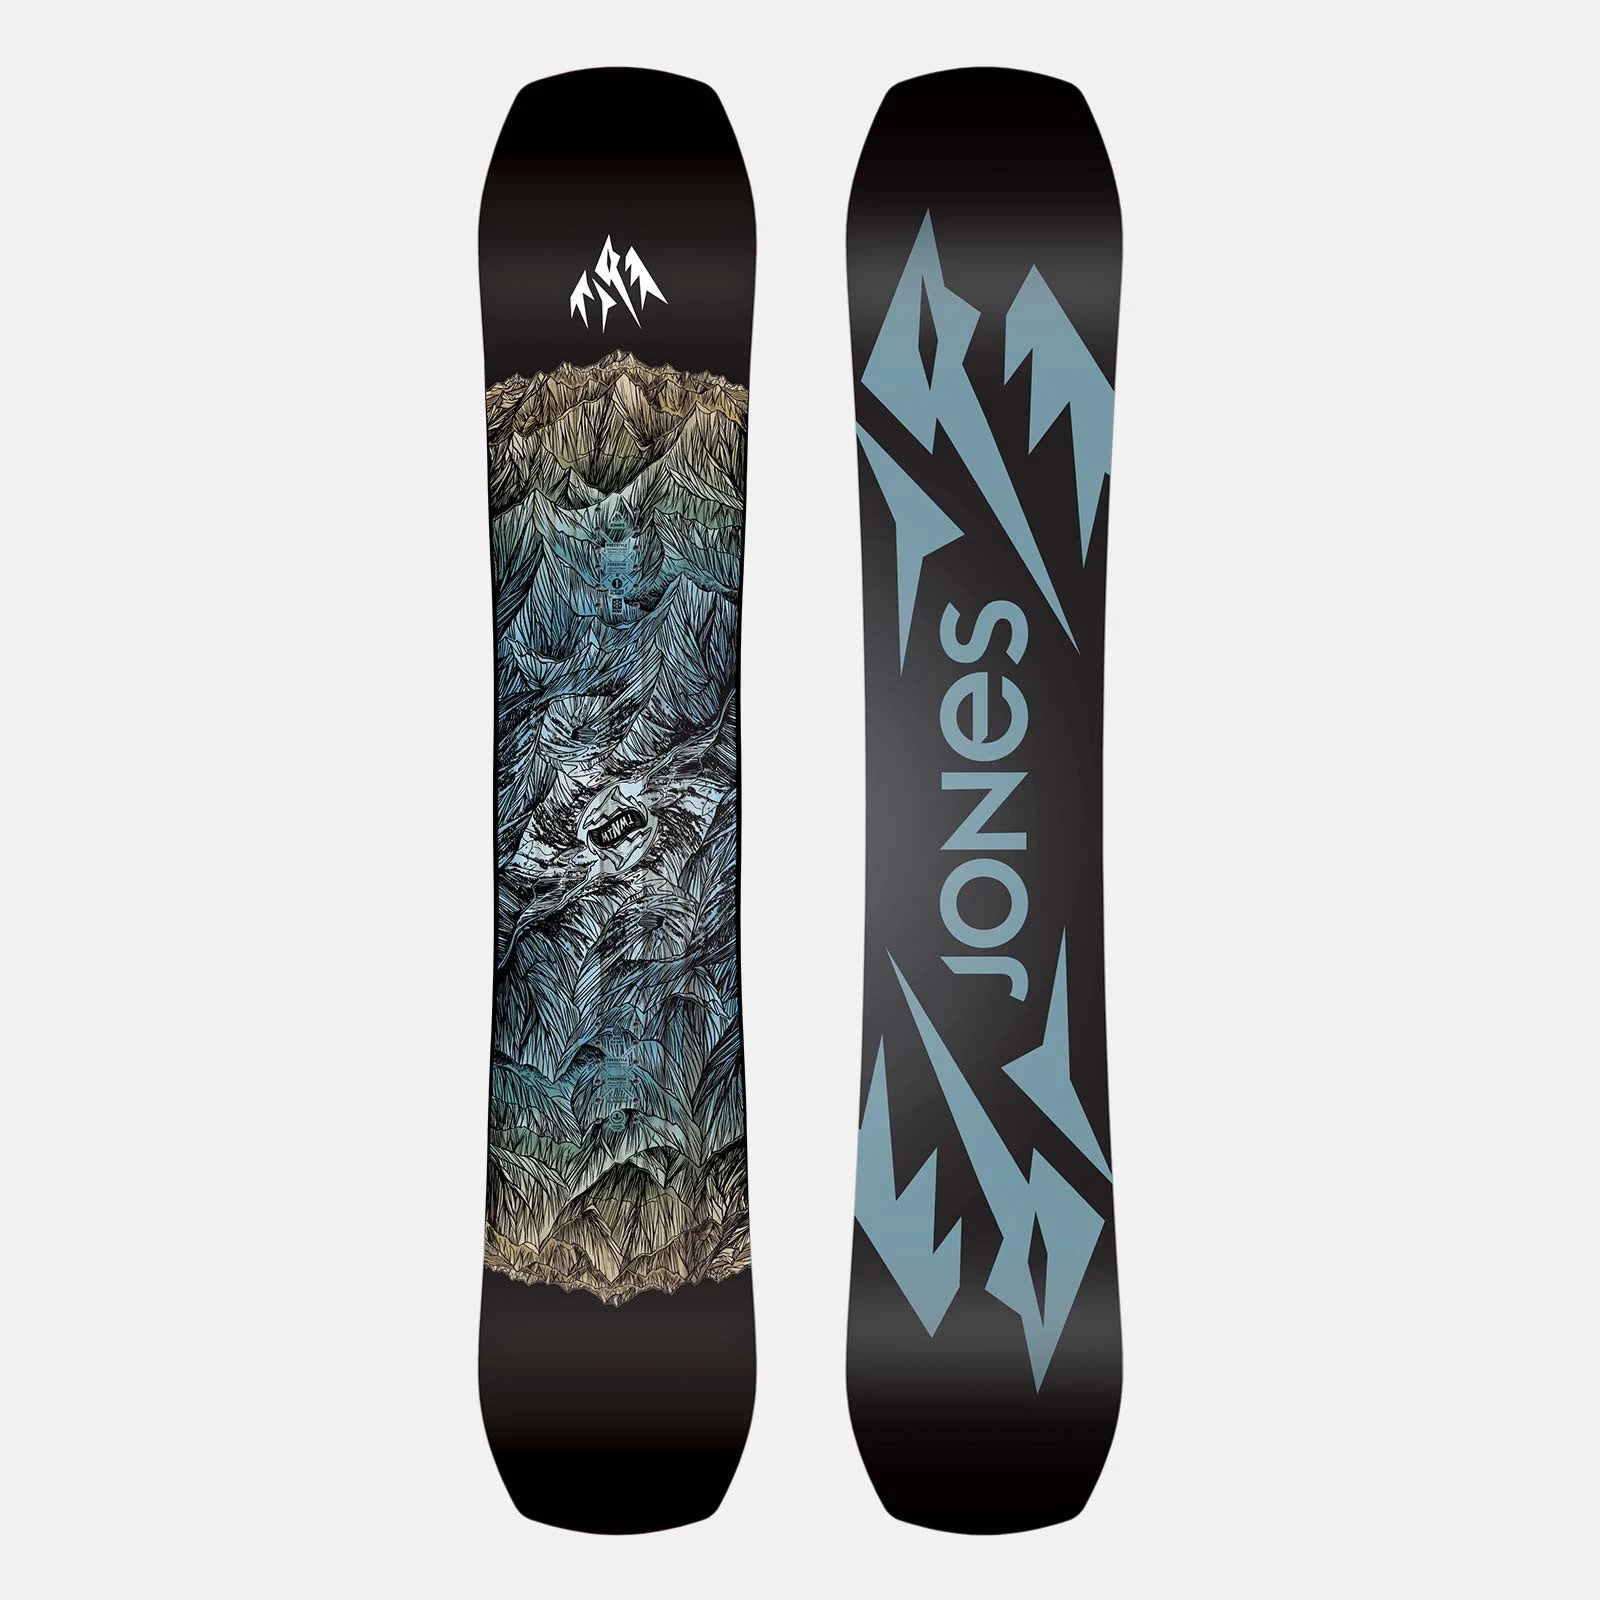 Ideal for slashing, jibbing, and jumping  The Mountain Twin is a versatile and capable directional twin made for riders who want a playful all-mountain board that excels in any snow condition. It’s built to shred the whole mountain like an endless skatepark without sacrificing float in pow.